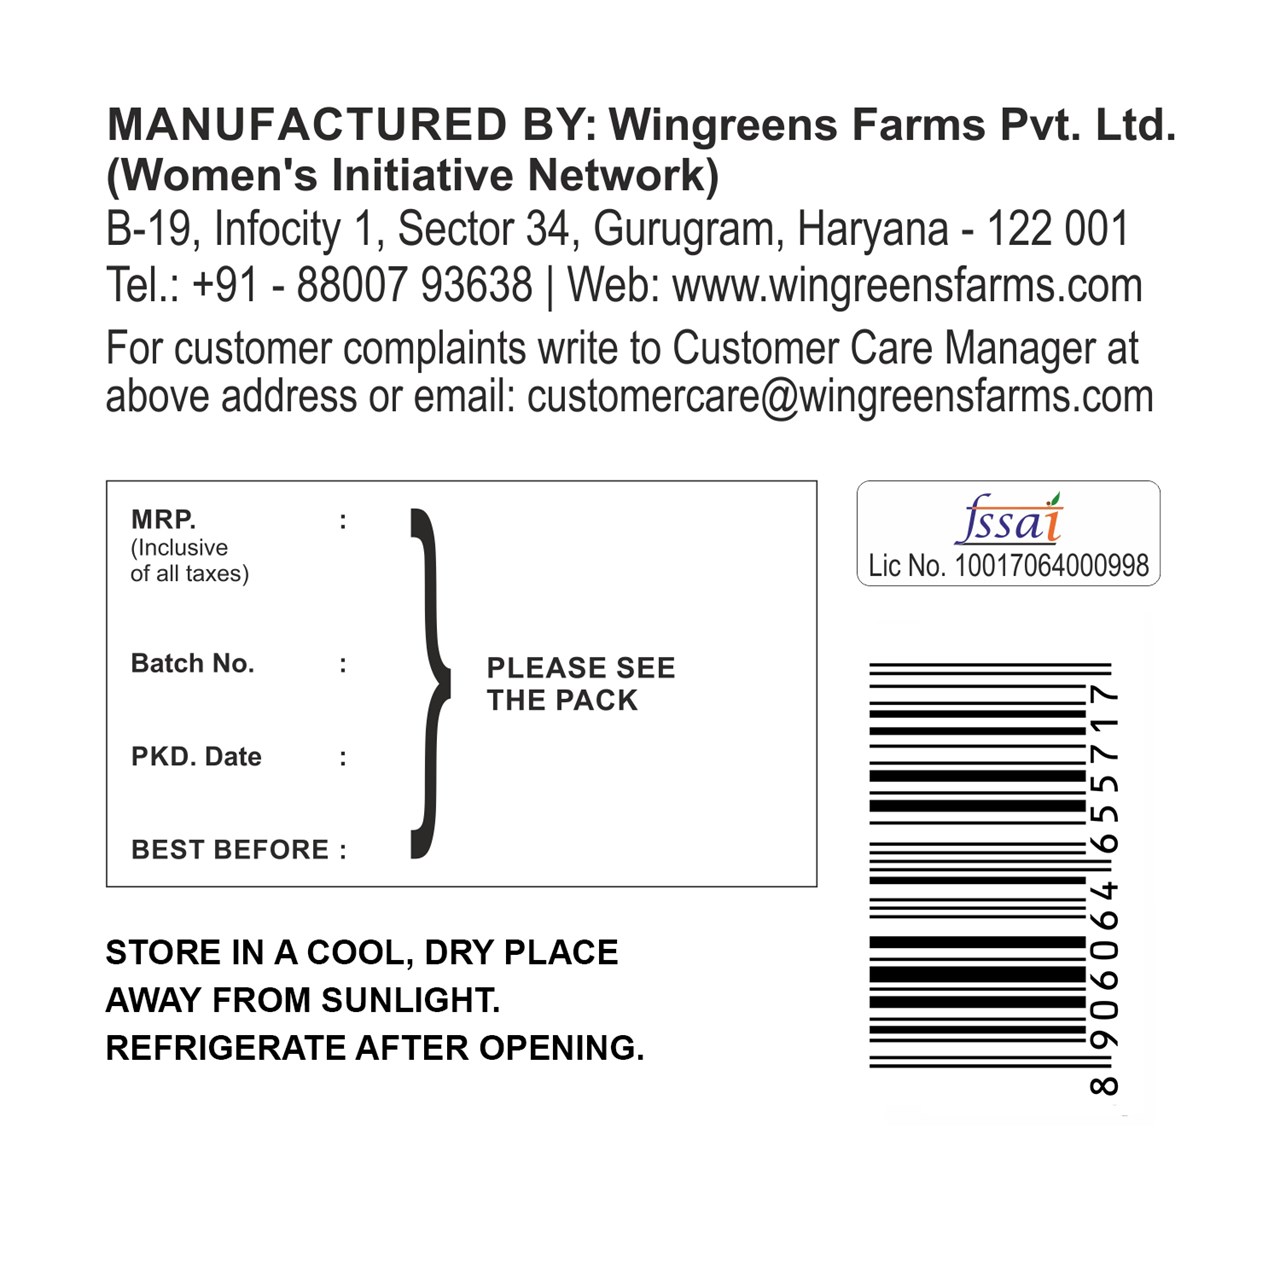 Picture of Wingreens Premium Veg Mayo Spout Pouch450g